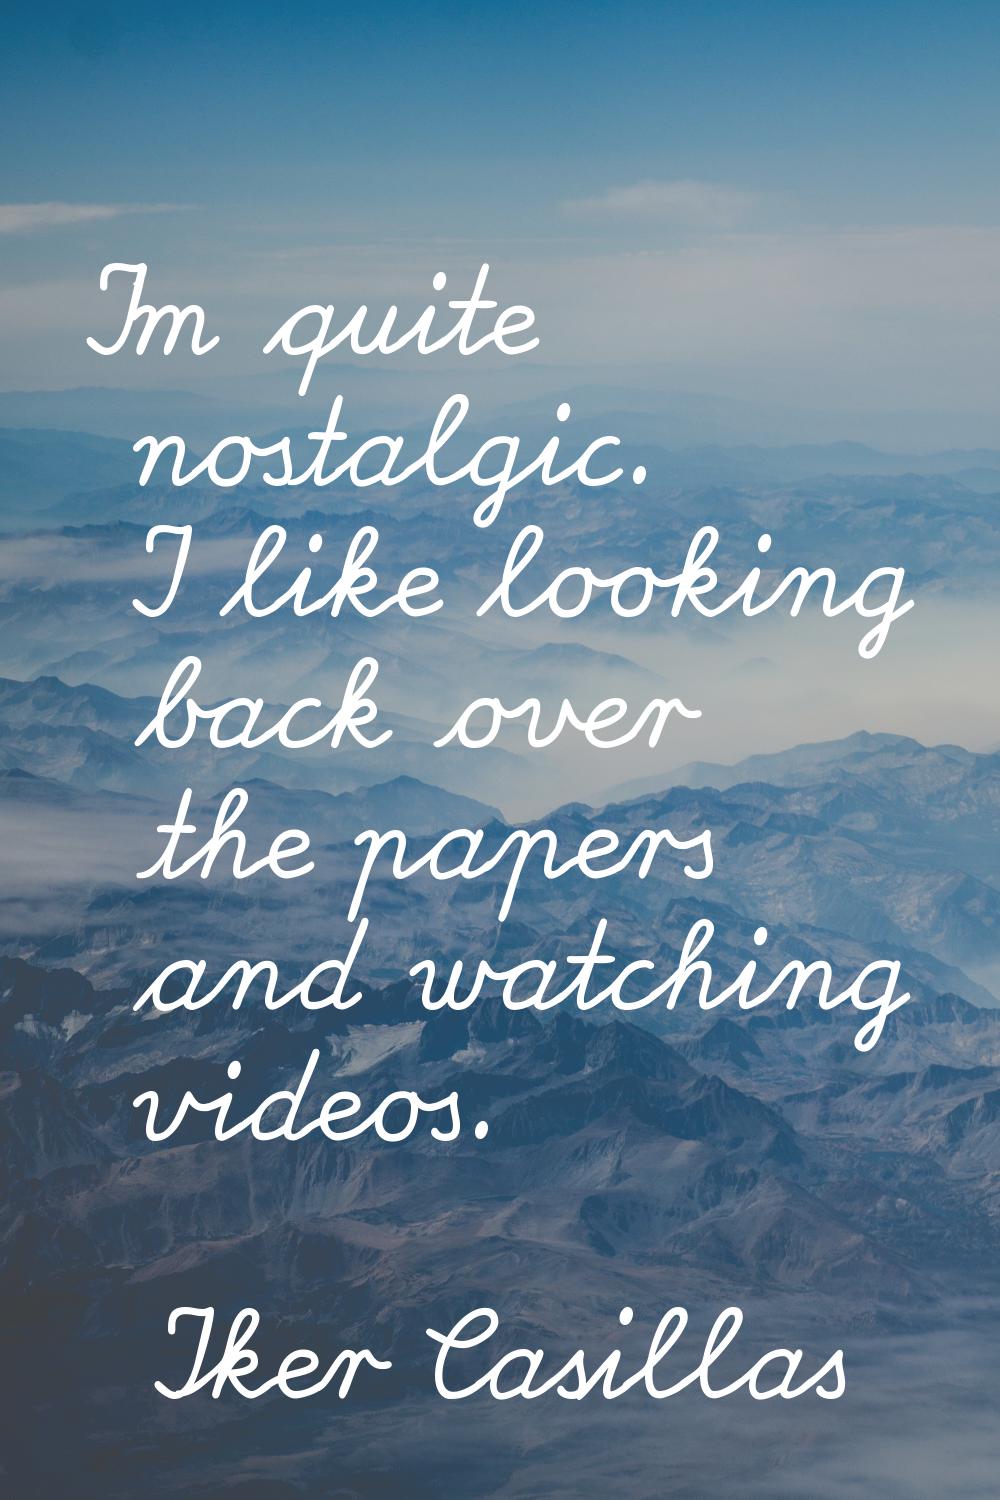 I'm quite nostalgic. I like looking back over the papers and watching videos.